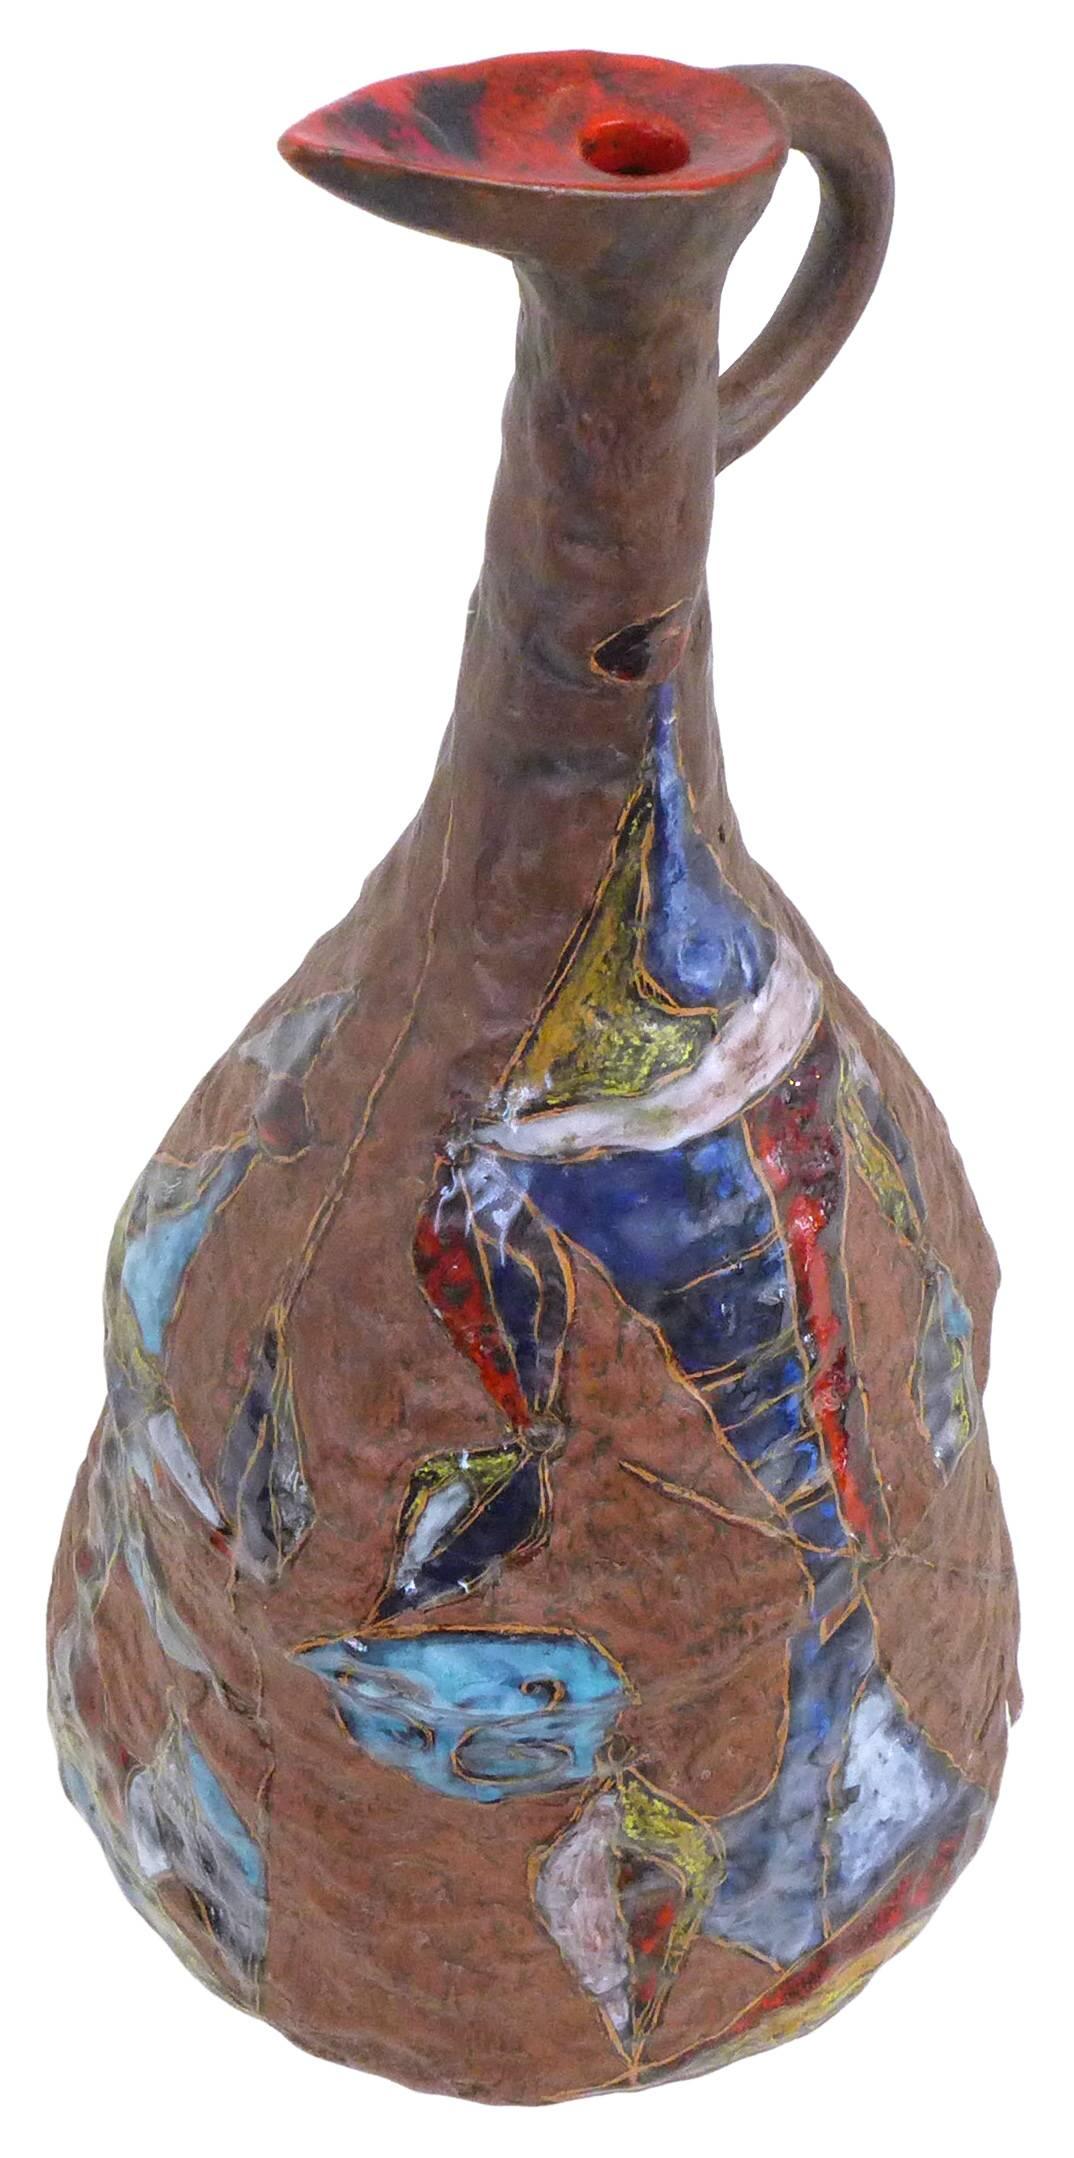 An exceptional ceramic pitcher by acclaimed Italian ceramicist Marcello Fantoni. A hand-built, textured, earth-toned vessel decorated with two cubist gondoliers in a multicolored, high-gloss glaze and a burst of red at its mouth. Great scale and